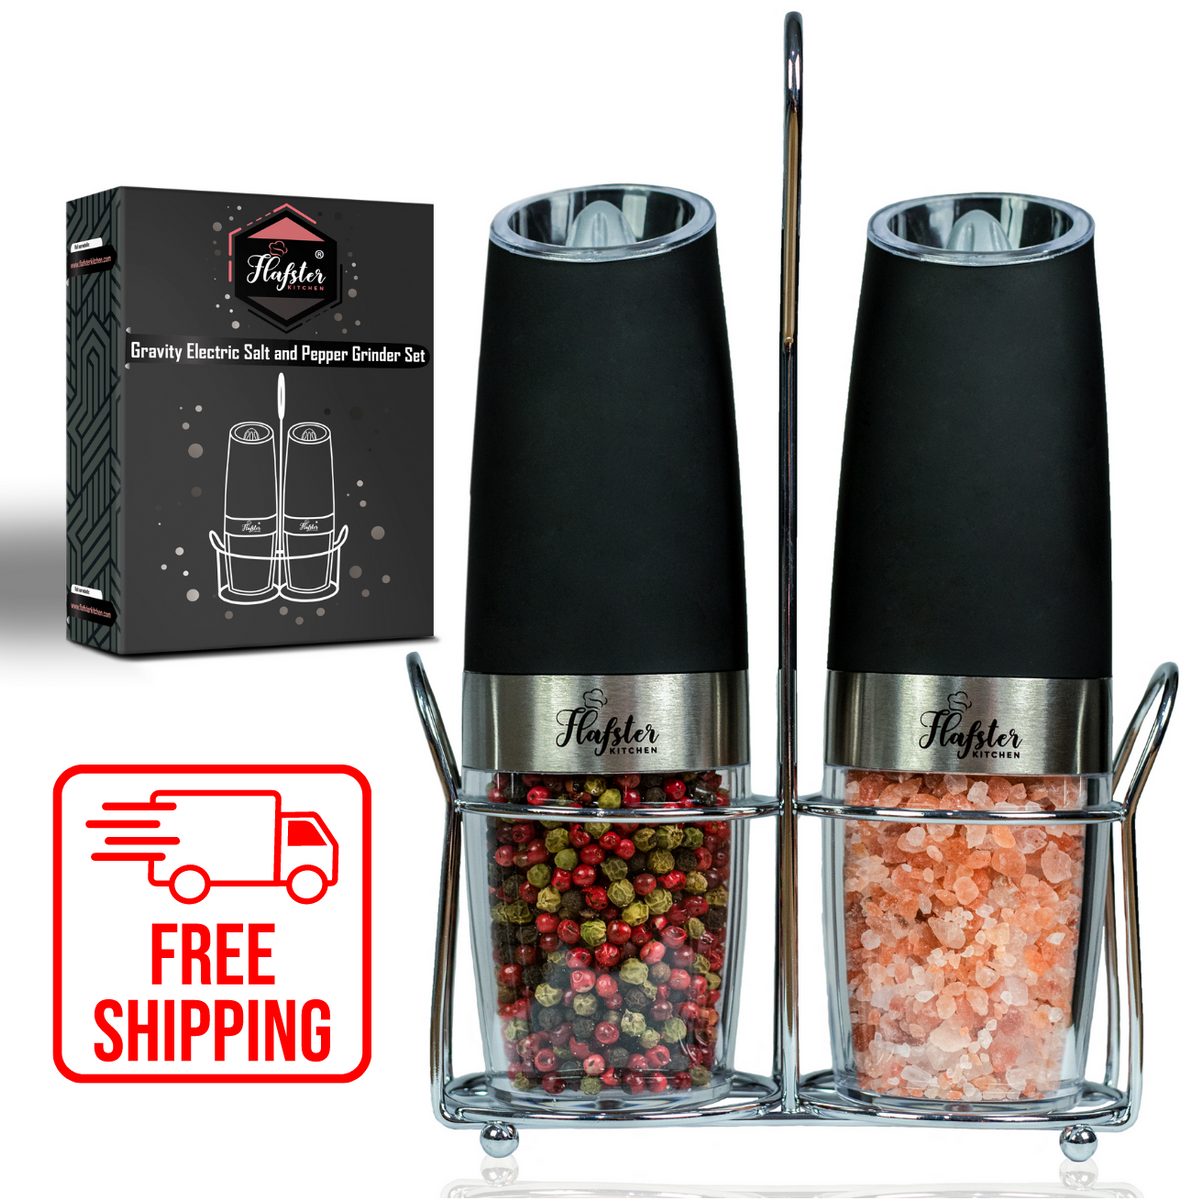 Gravity Electric Salt and Pepper Grinder Set, Battery Operated